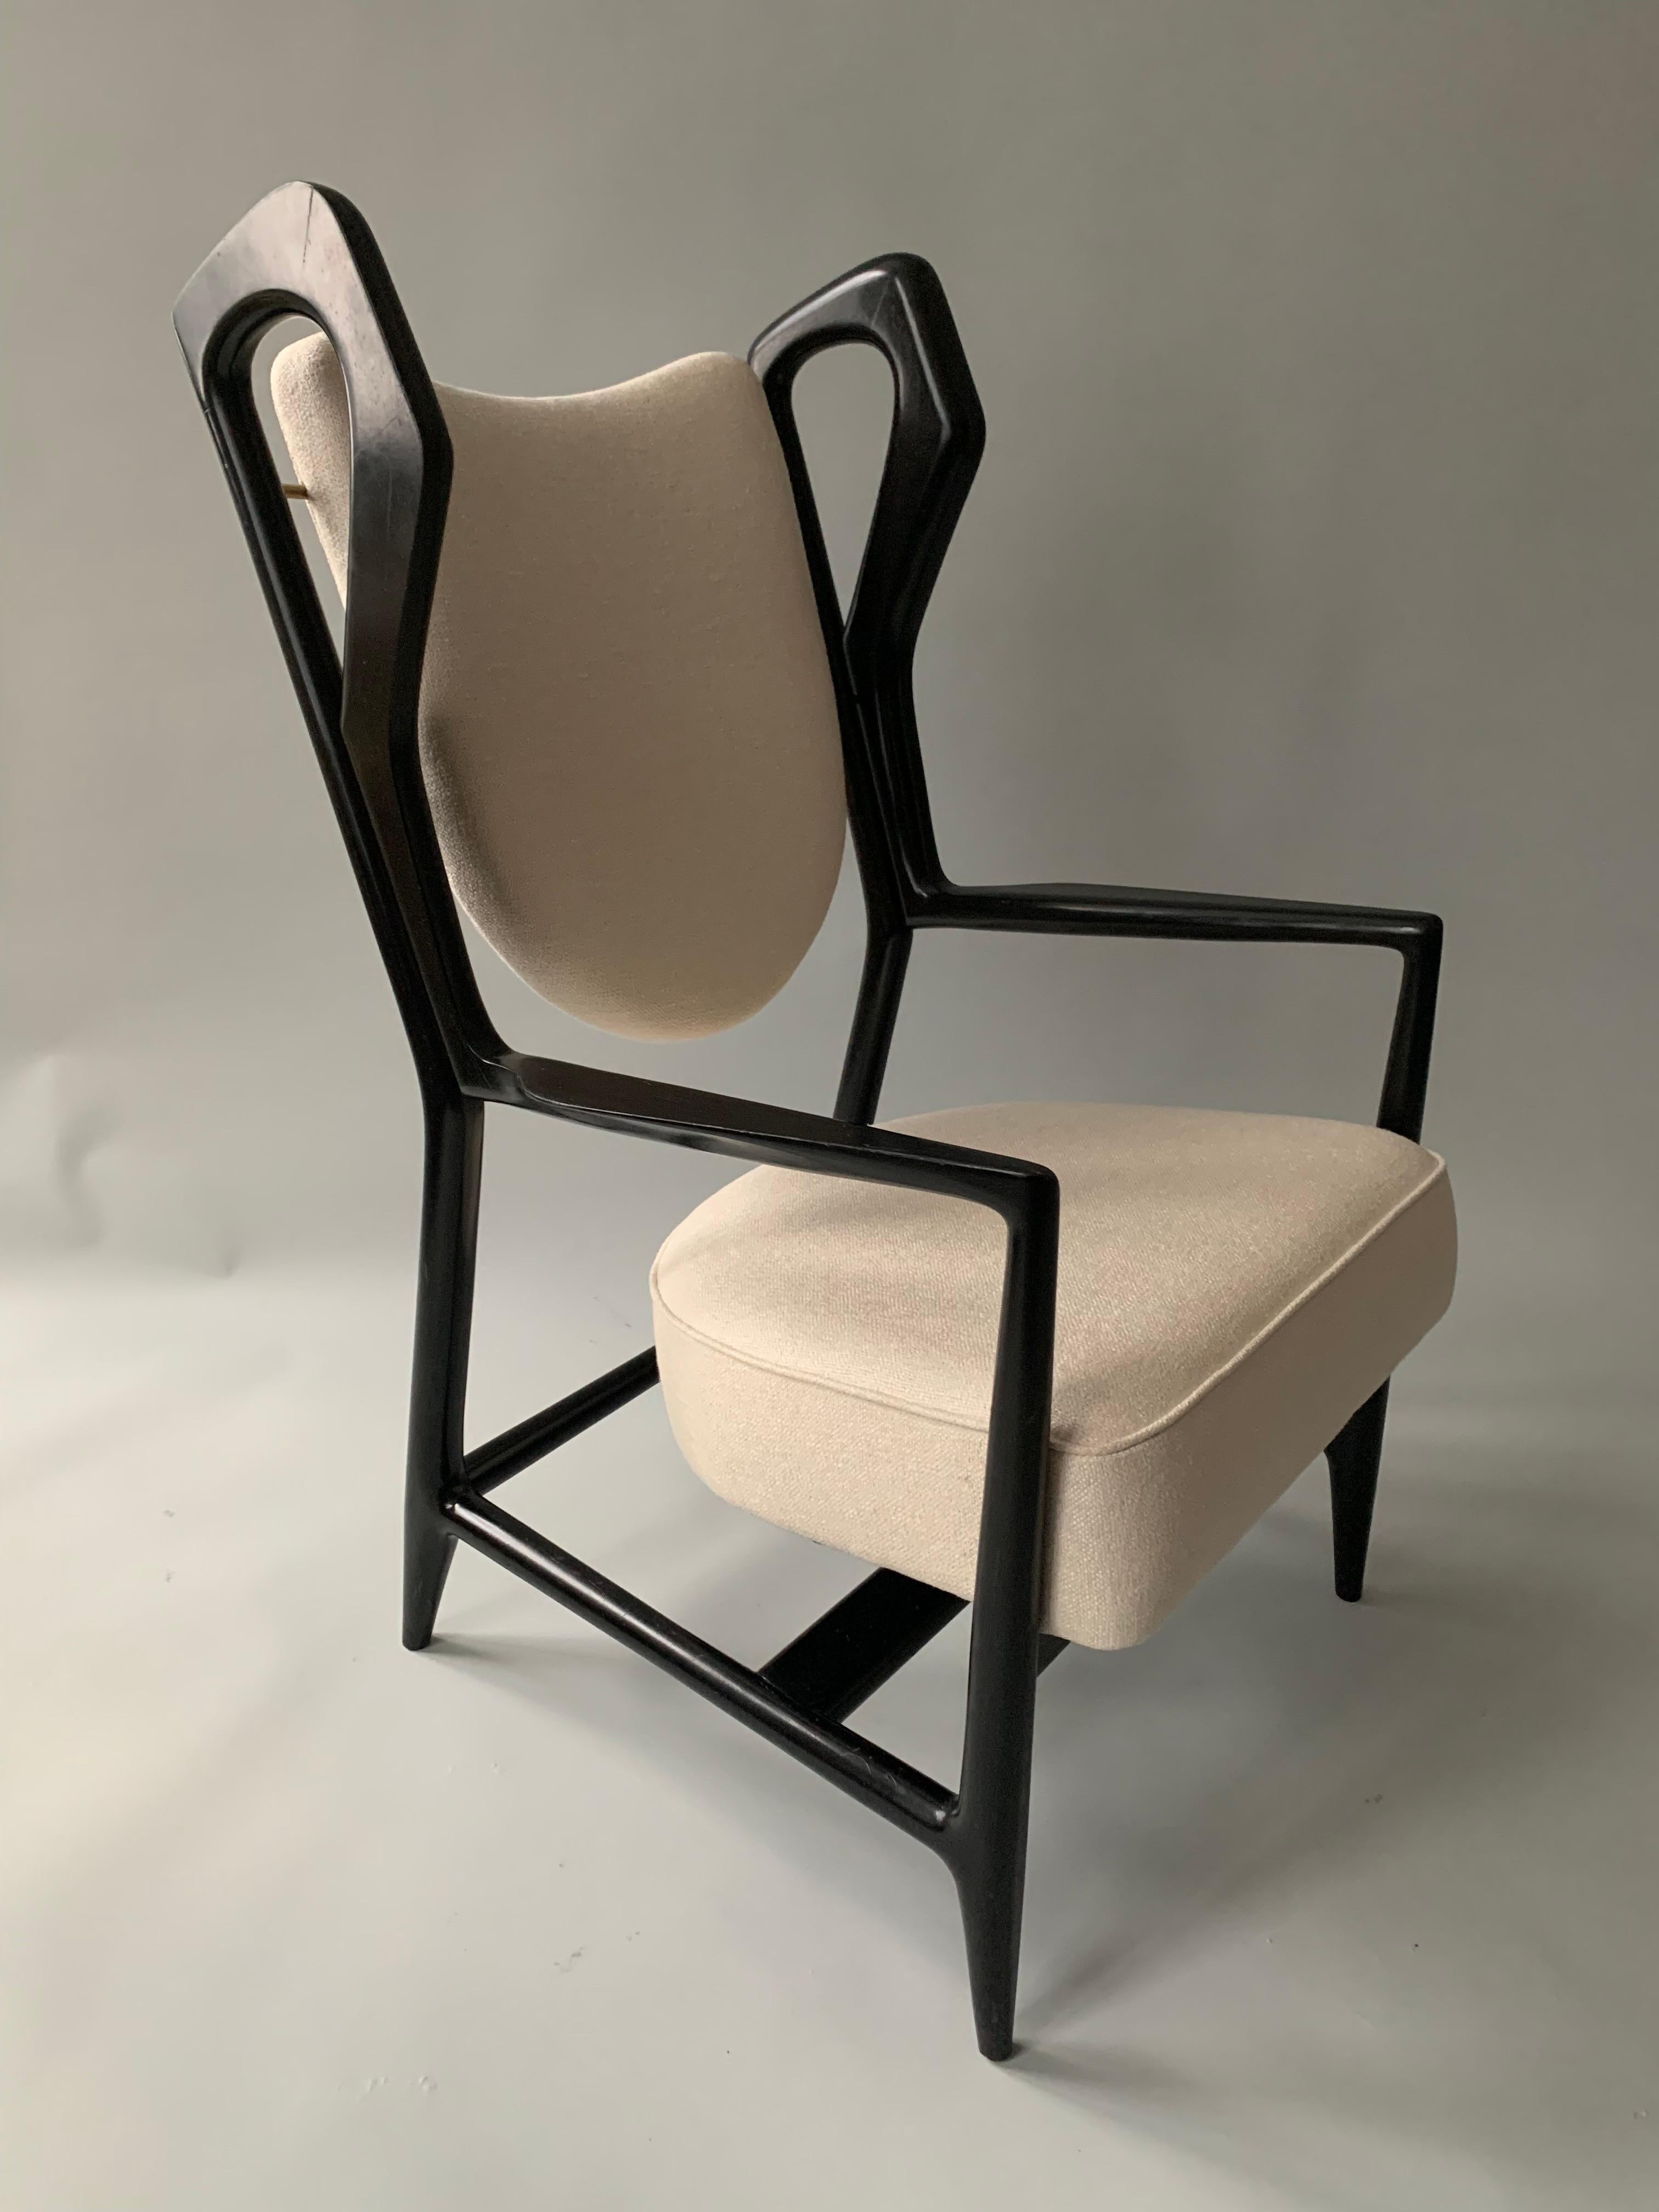 
Item: ‘Triennale’ armchairs

Designer: Gio Ponti 

Manufacturer: I.S.A. Bergamo

Demensions: 41 7/8” h x 24 1/4” w x 28 7/8” d

Material: ebonized walnut, brass and fabric

Date made: 1951

Country of origin: Italy

Literature:
Domus, no. 280 March